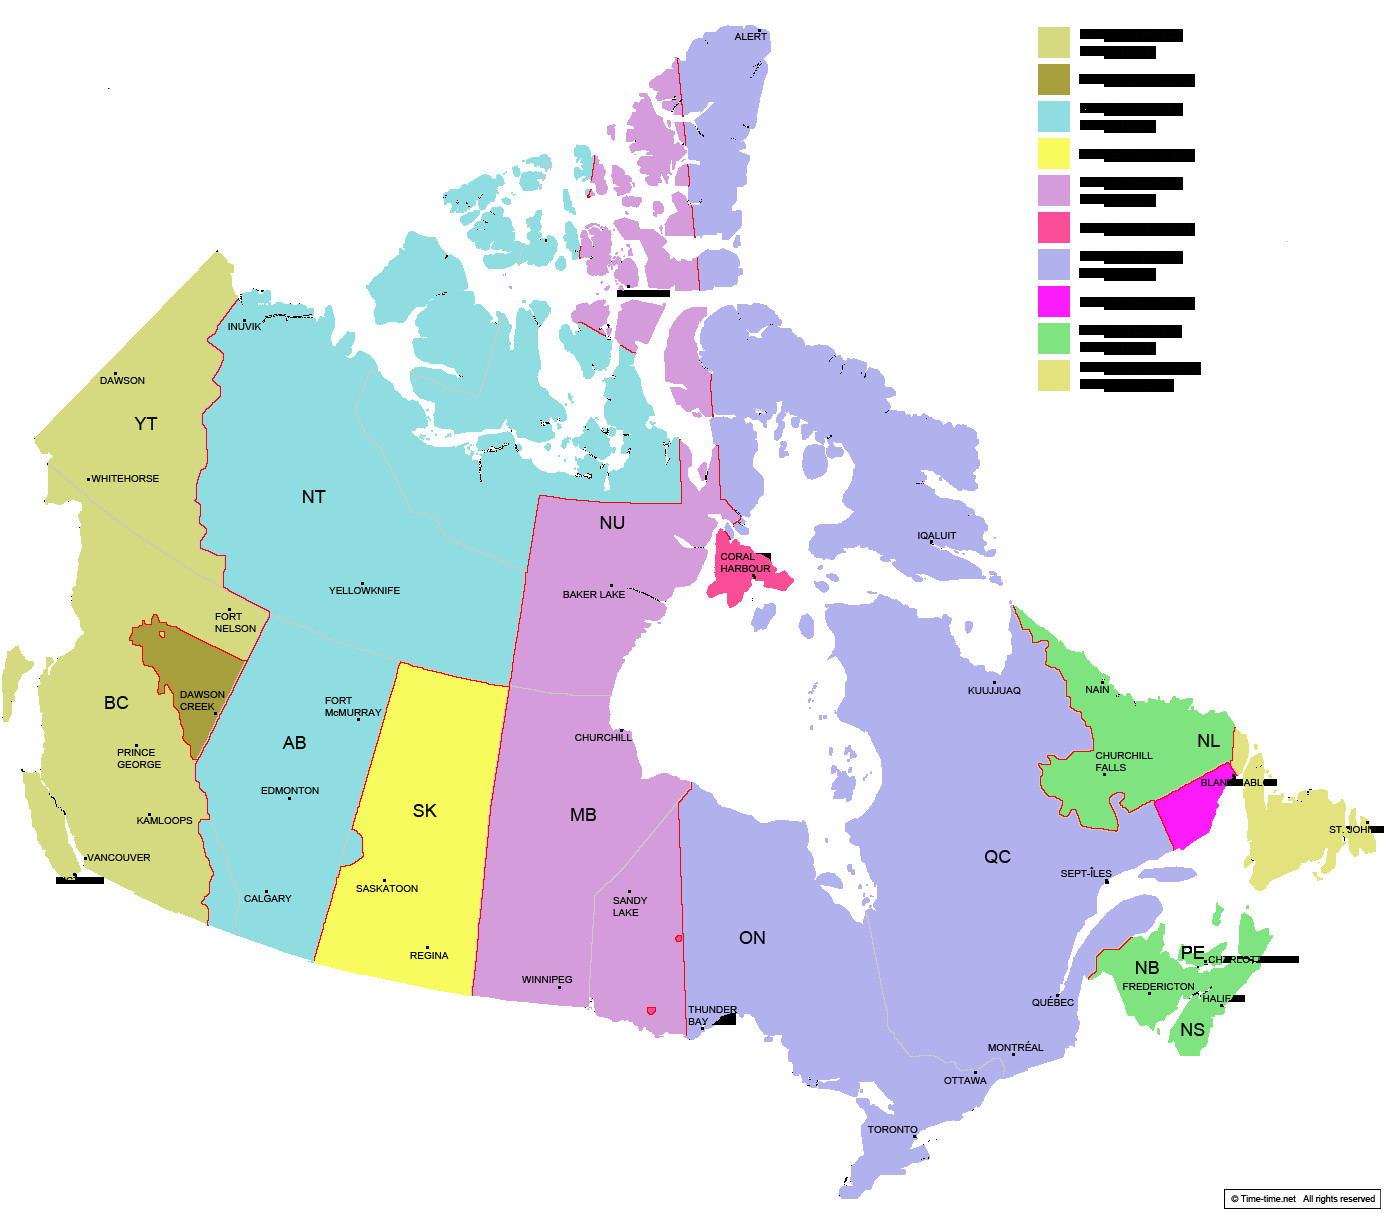 Usa and Canada Time Zone Map Canada Time Zone Map with Provinces with Cities with